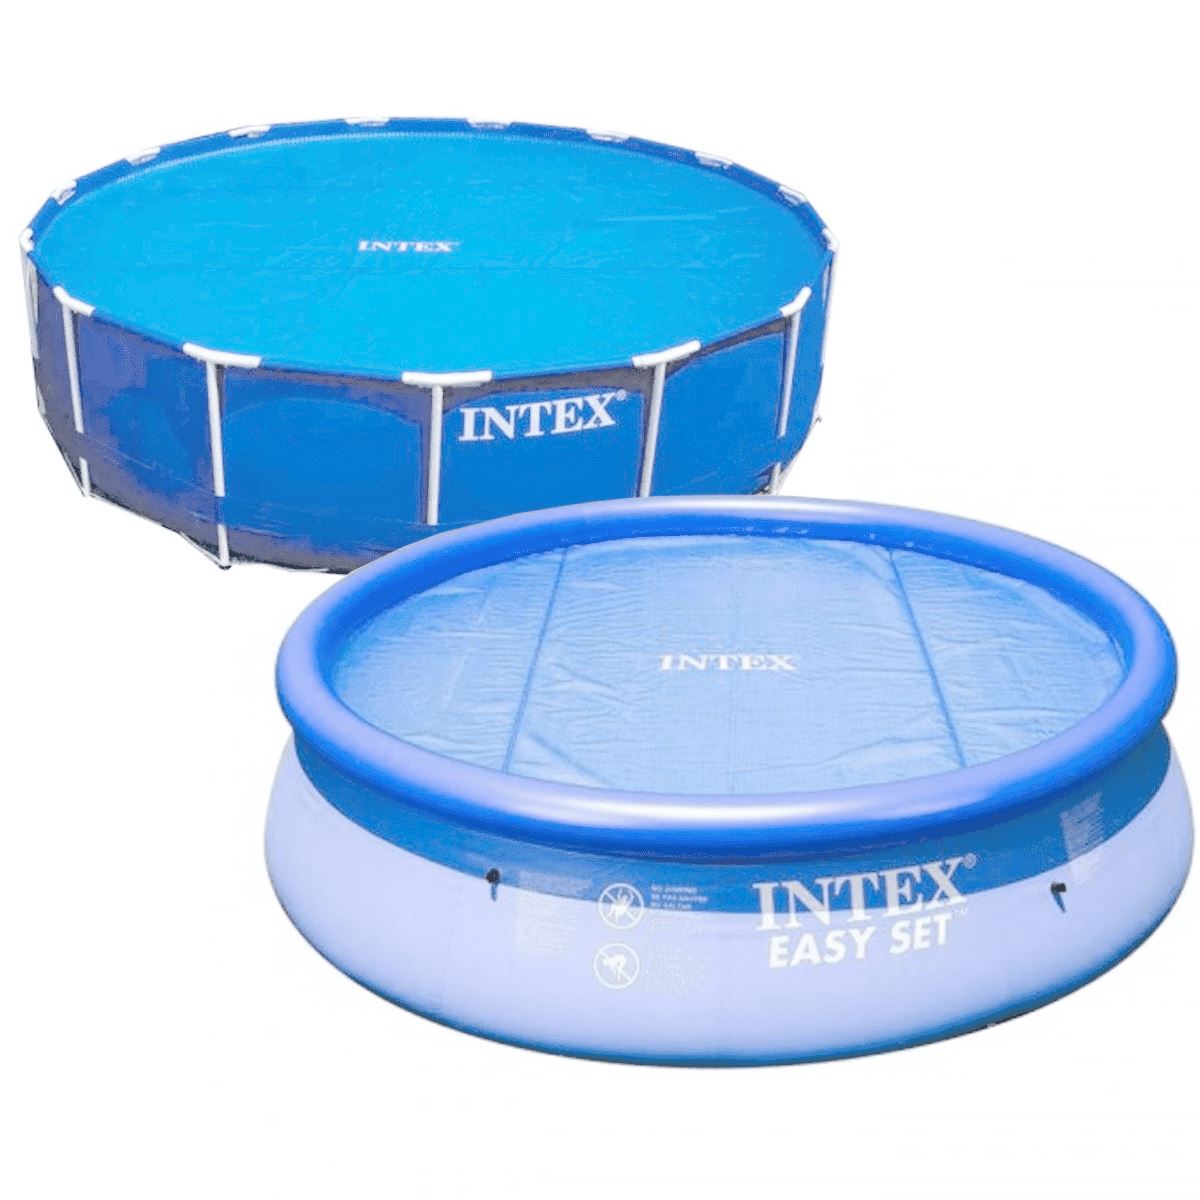 Intex floating solar cover/cover - round - Ø290 cm